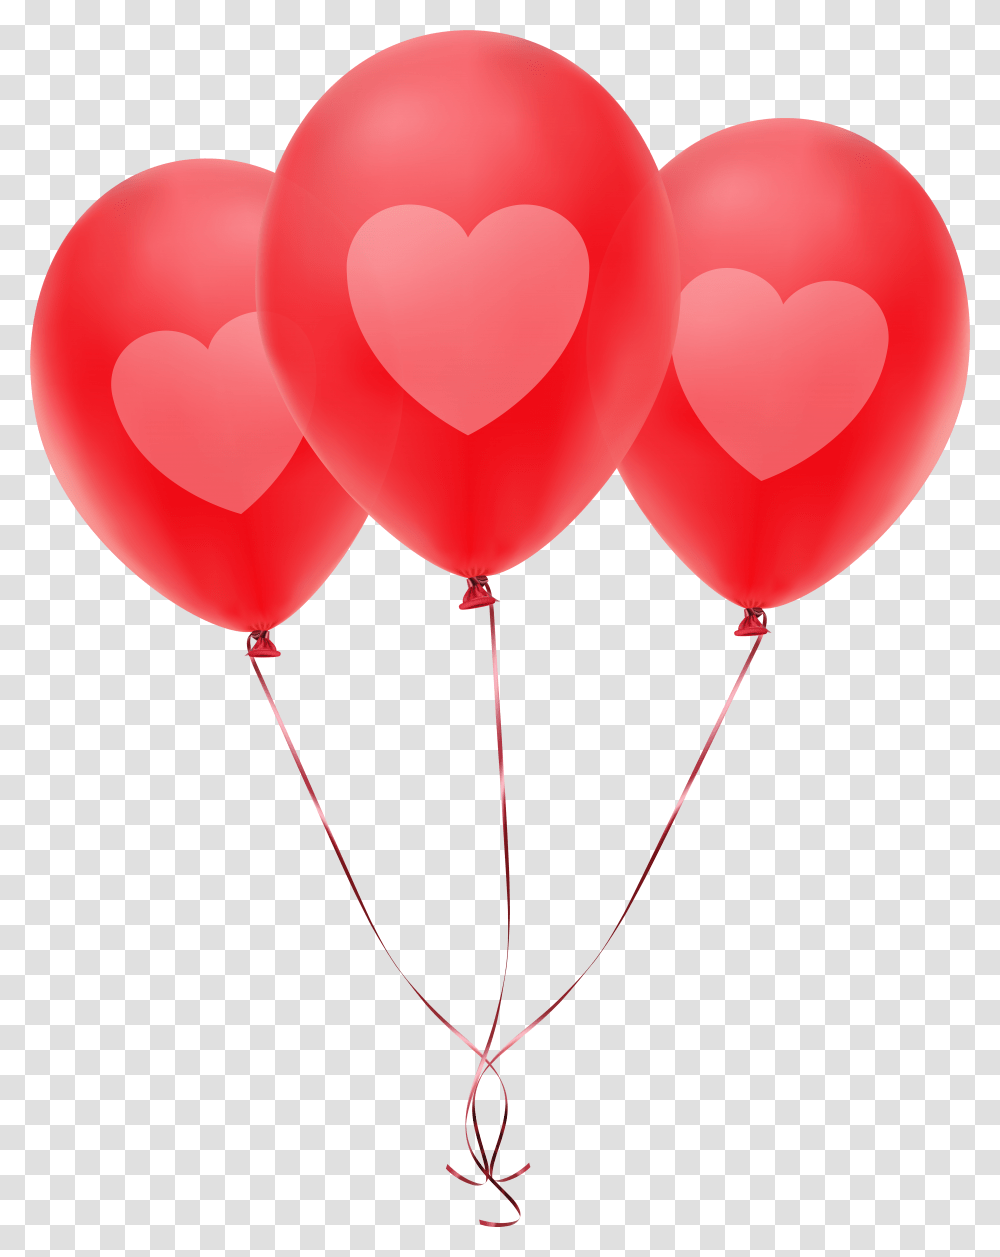 Red Balloons With Heart Clip Art Image Transparent Png